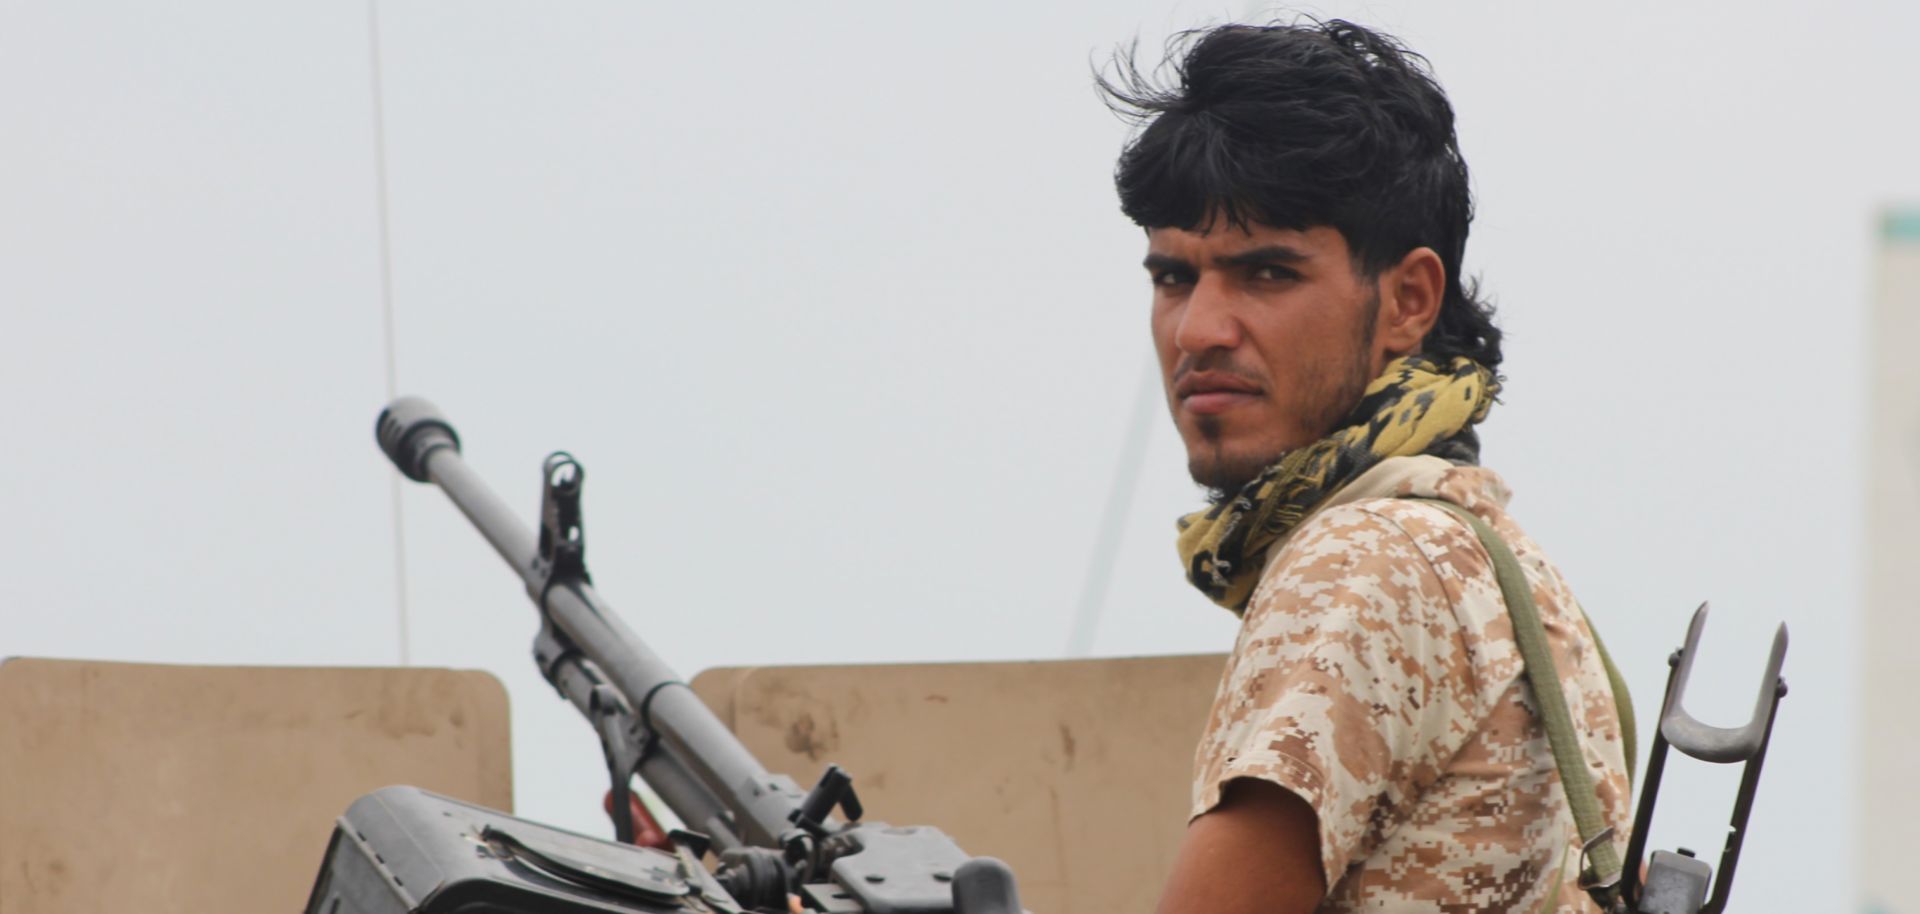 A southern Yemeni separatist holds position in Aden on Jan. 28.